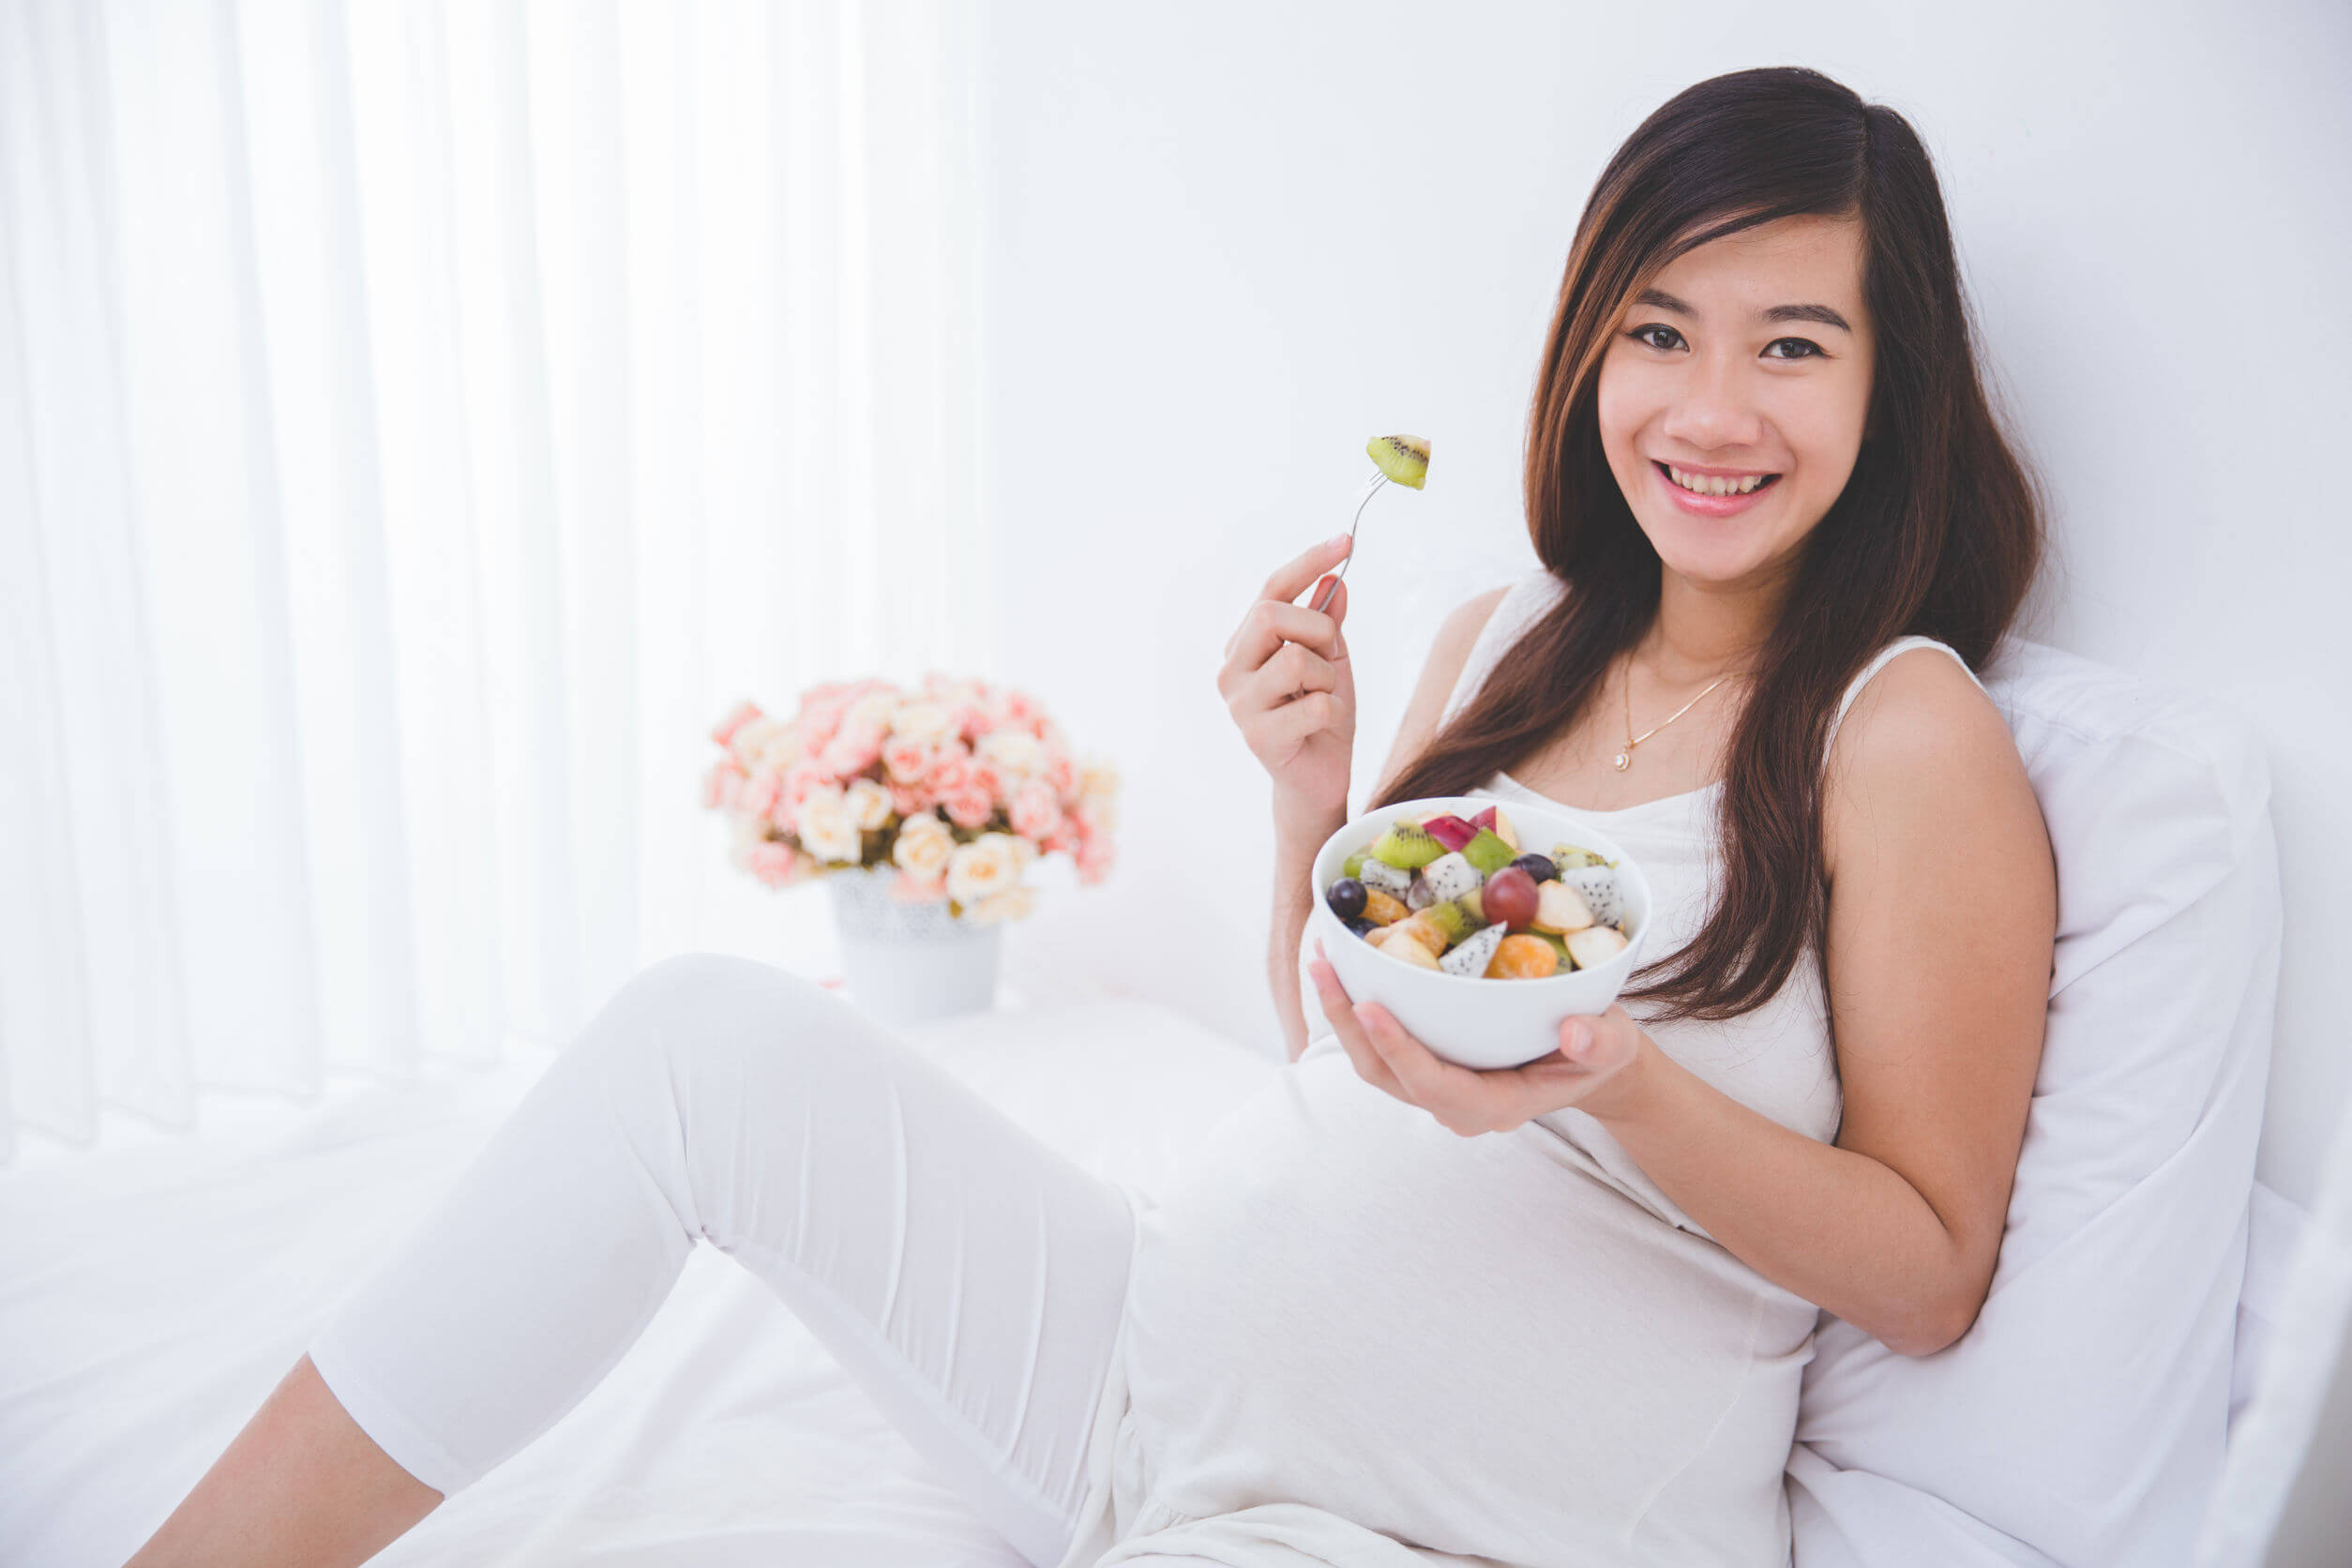 A pregnant woman sitting in bed eating fruit salad.